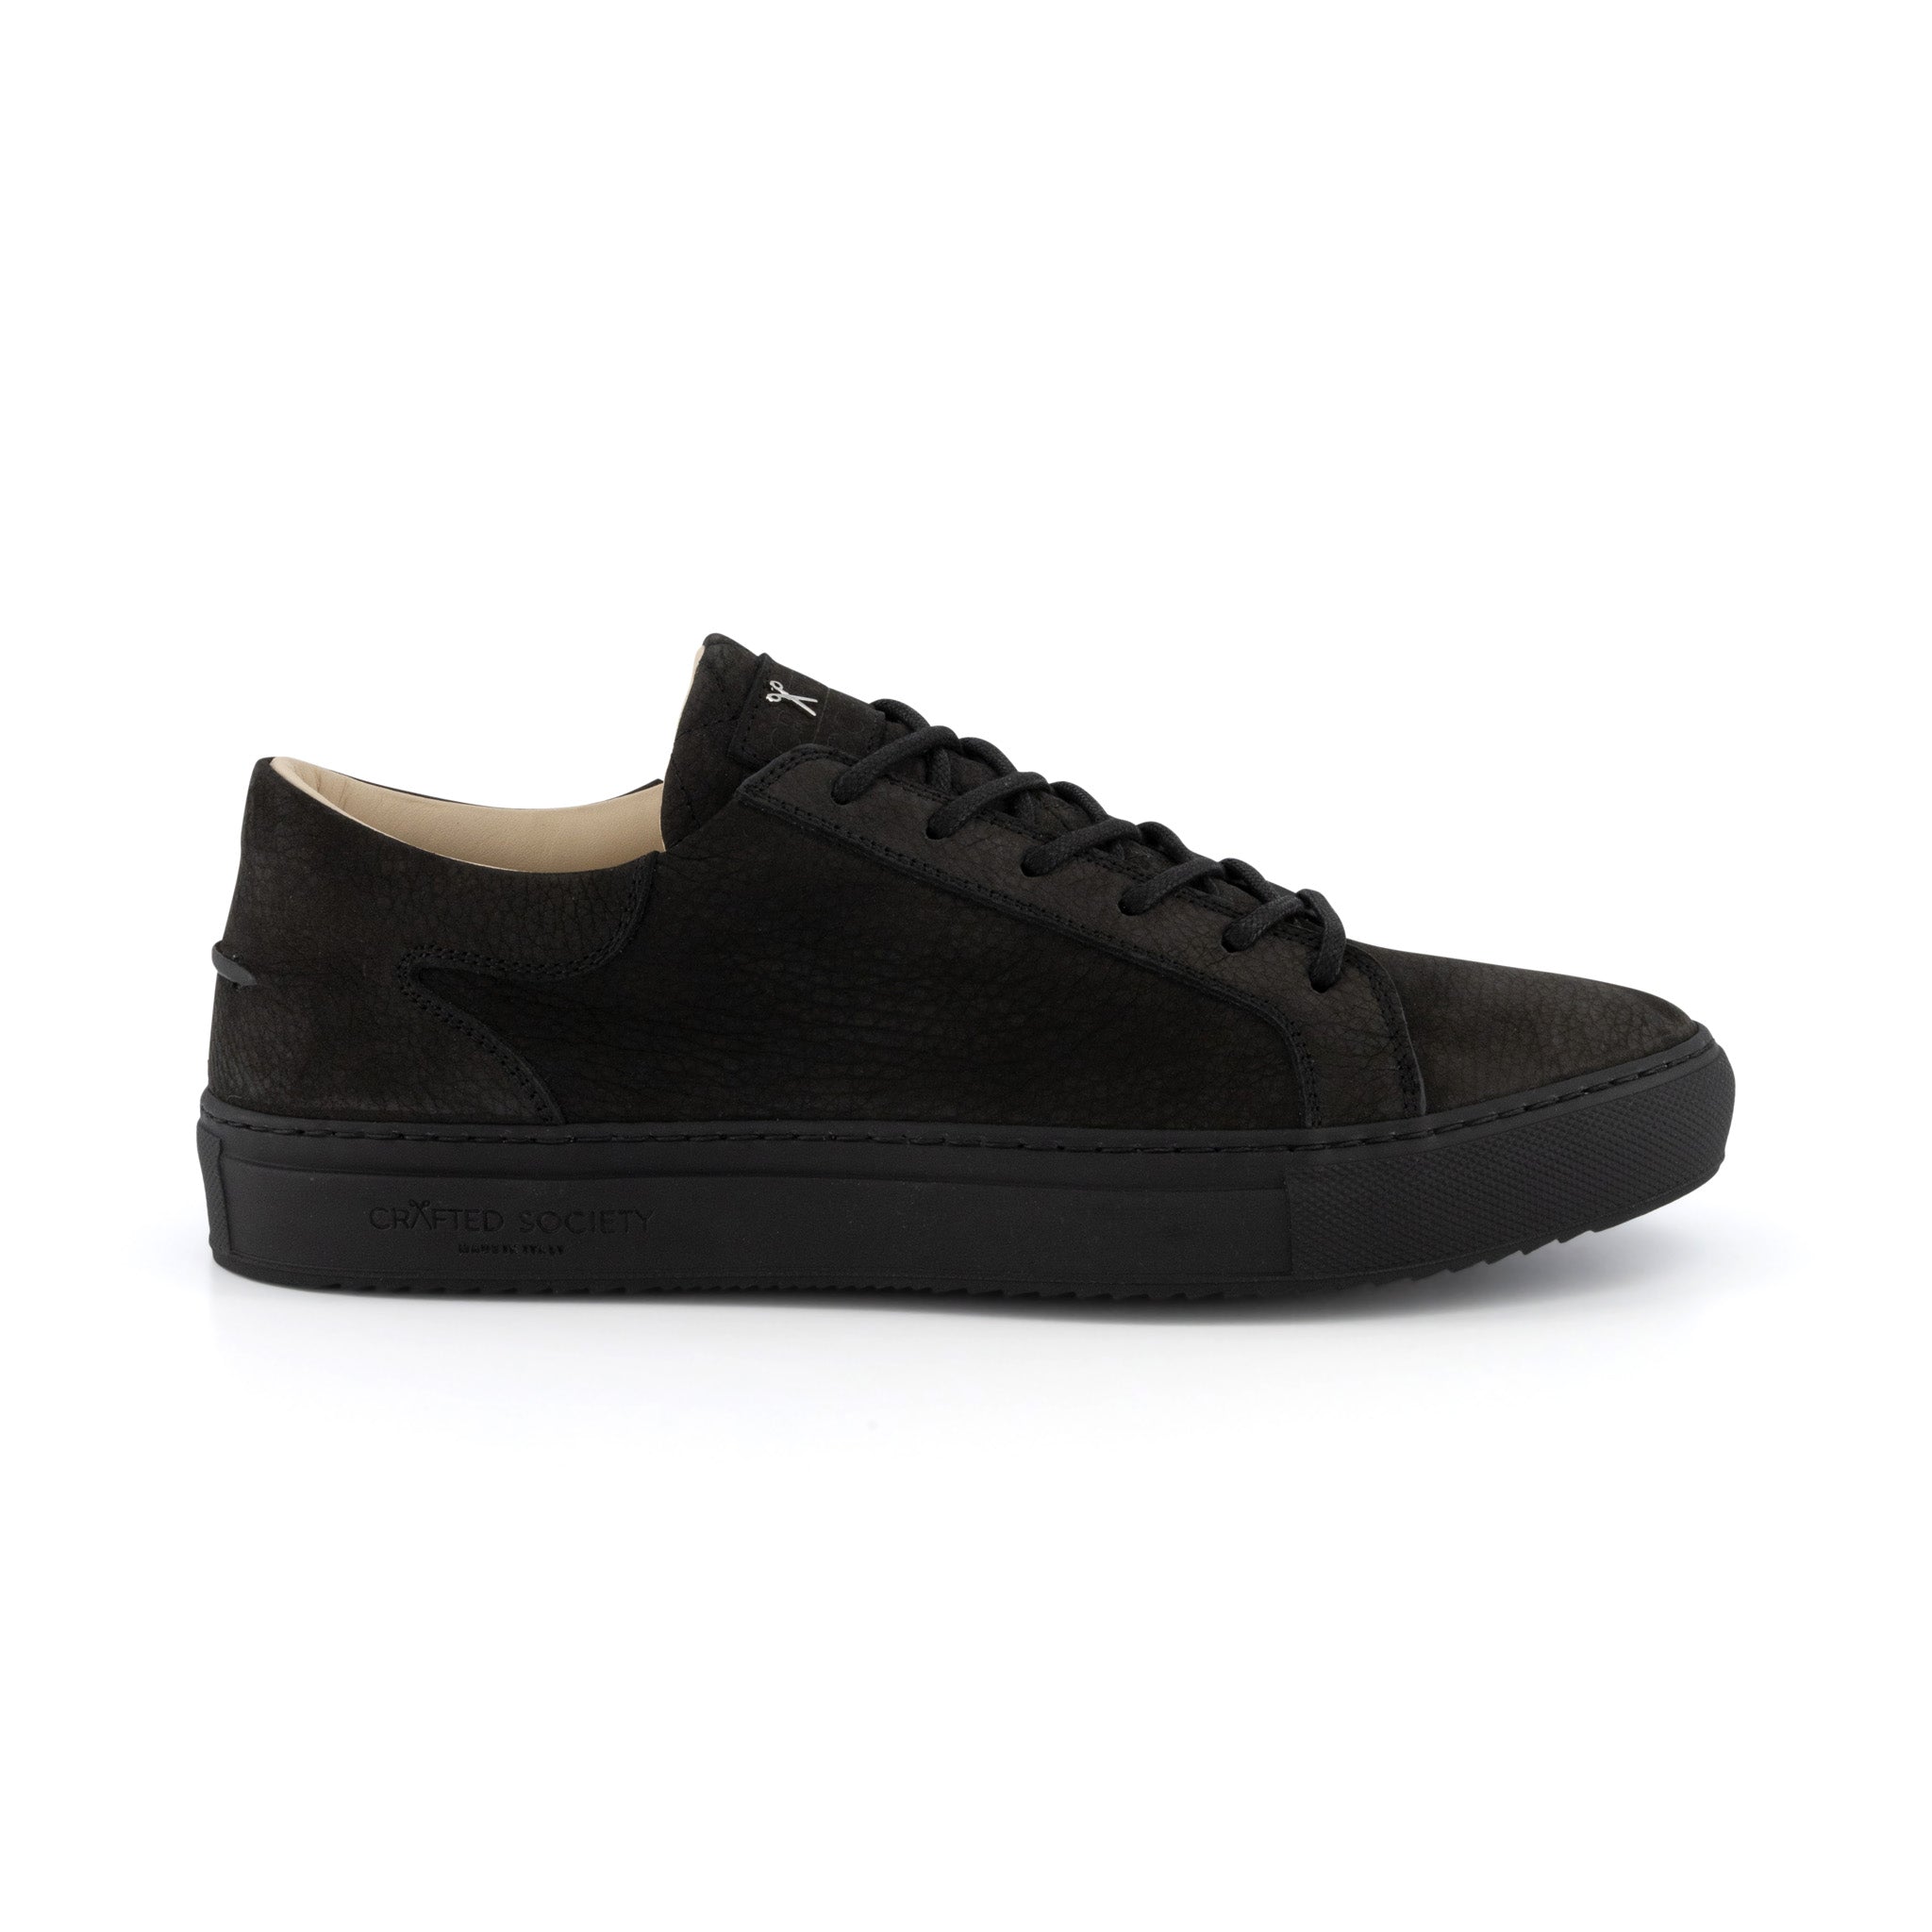 Mario Low Refined Sneaker | Black Nubuck | Black Outsole | Made in Italy